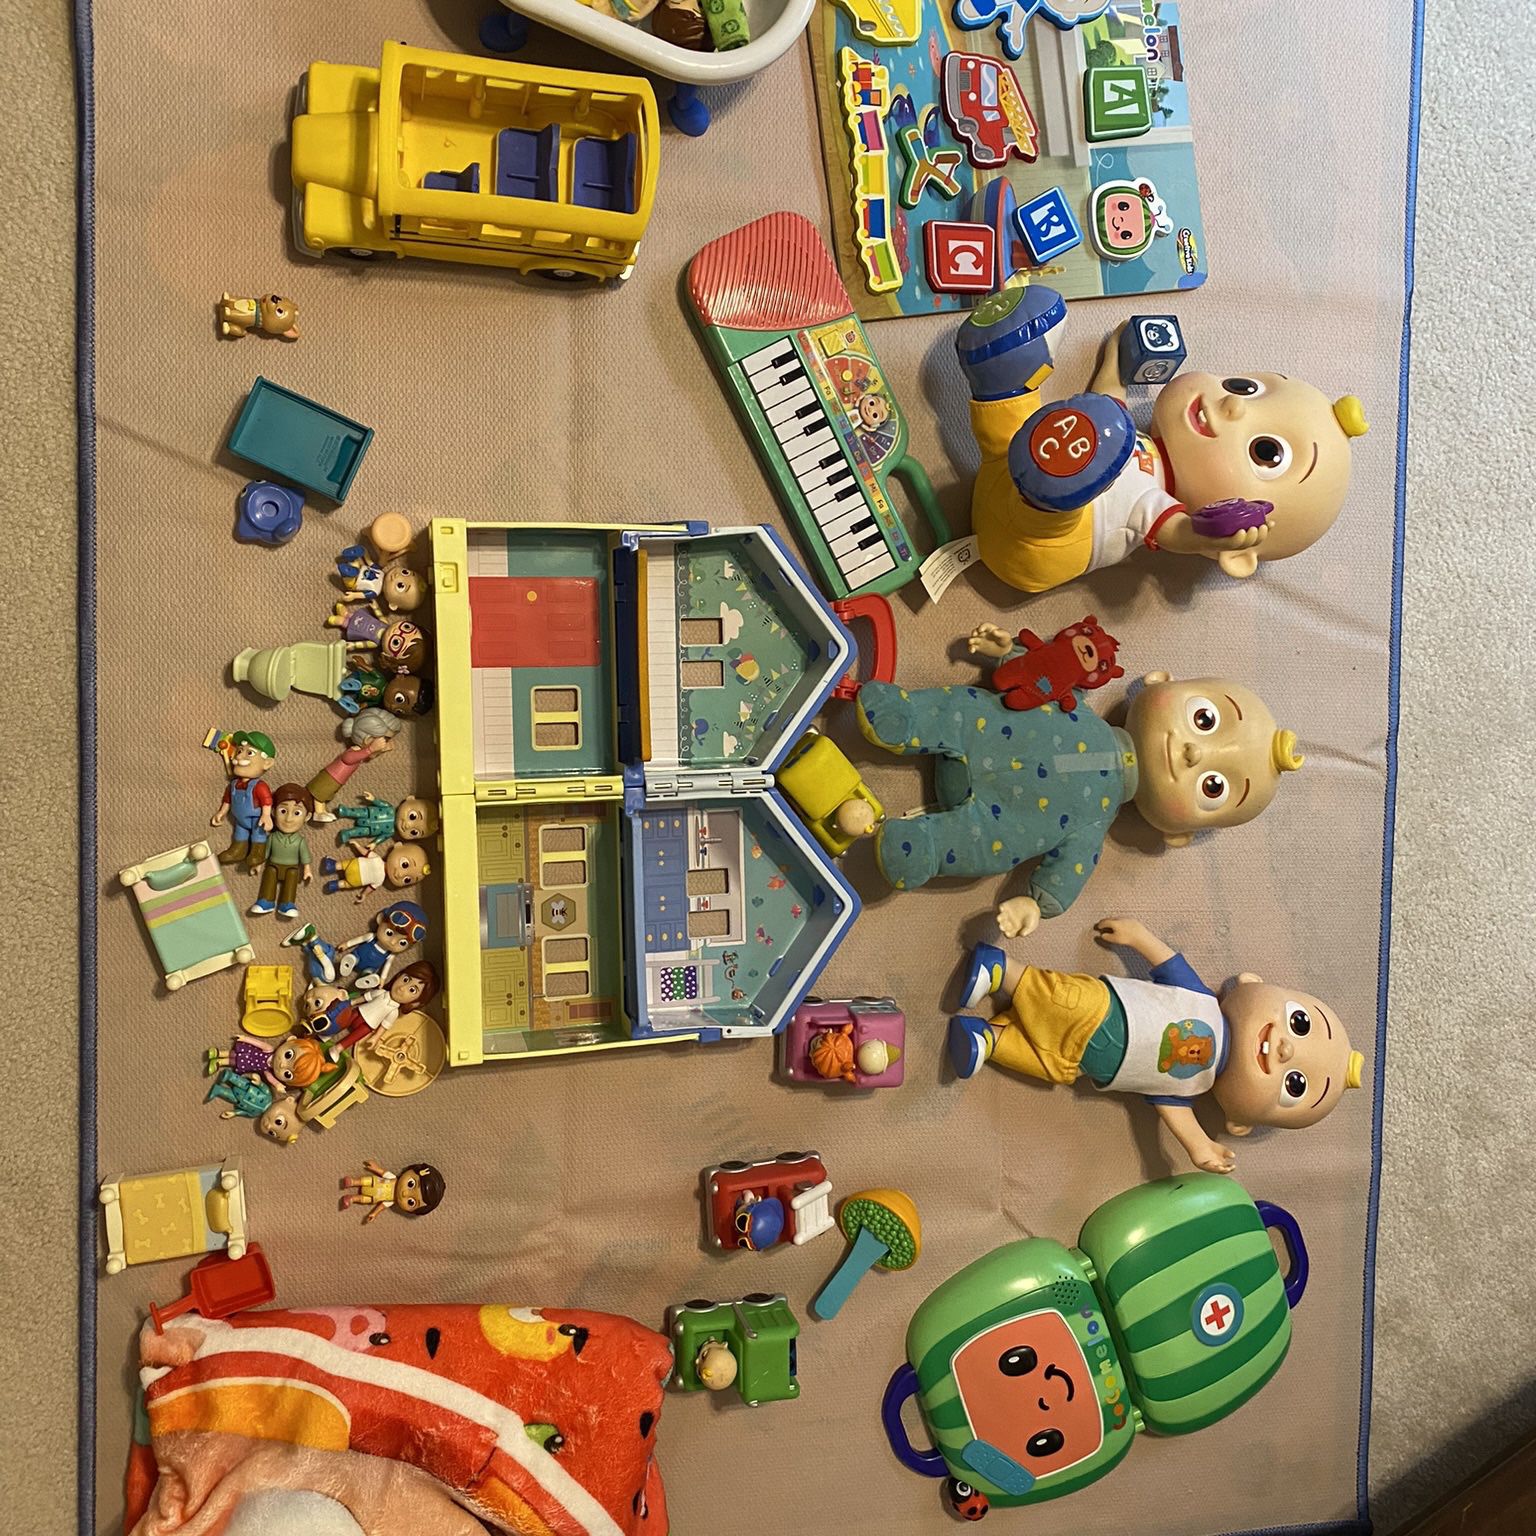 COCOMELON LUNCH BOX TOY for Sale in Pumpkin Center, CA - OfferUp